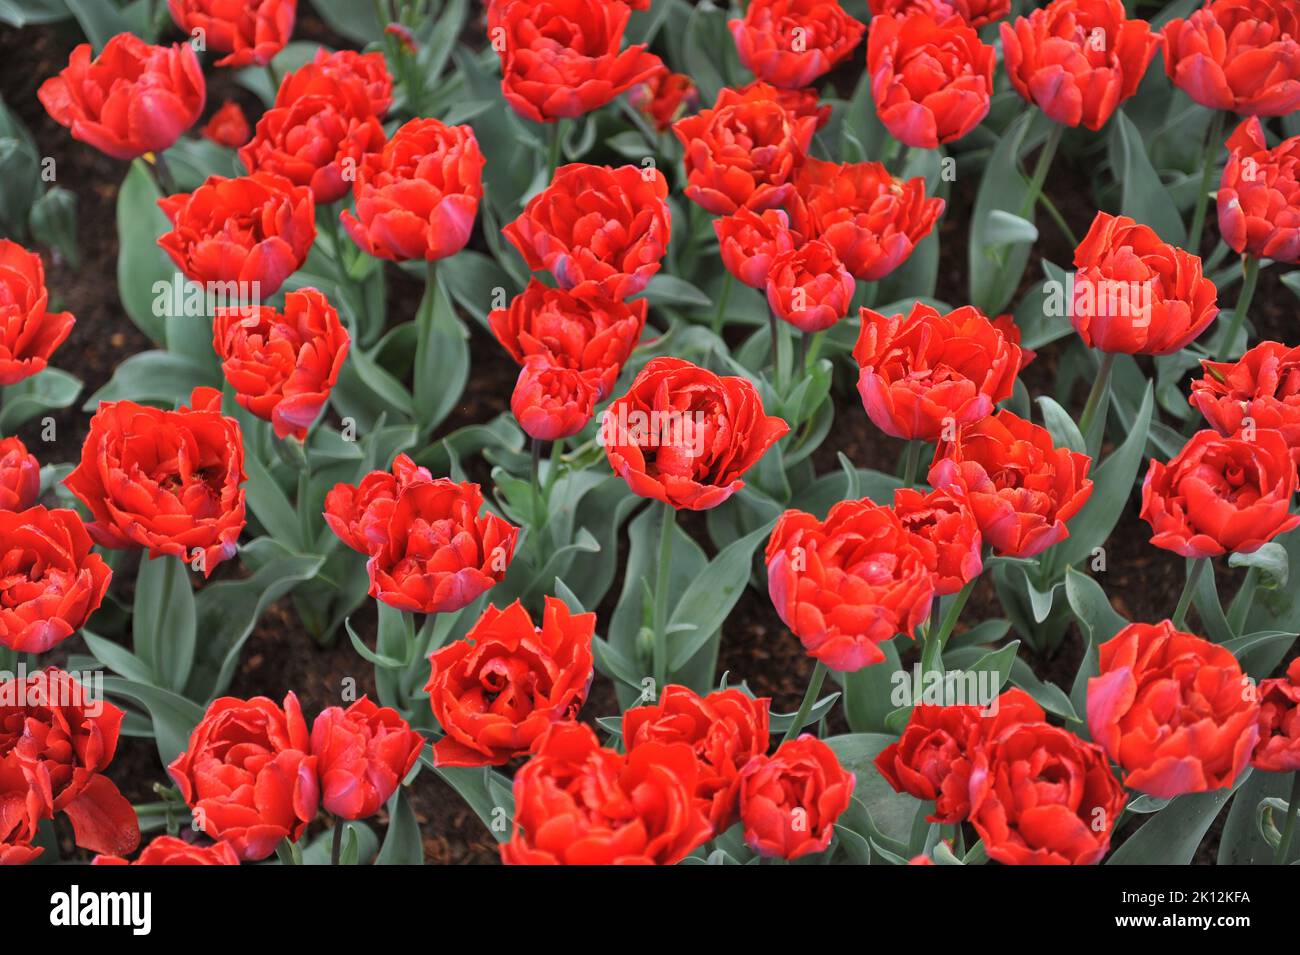 Peony-flowered Double Late tulips (Tulipa) Red Princess bloom in a garden in April Stock Photo